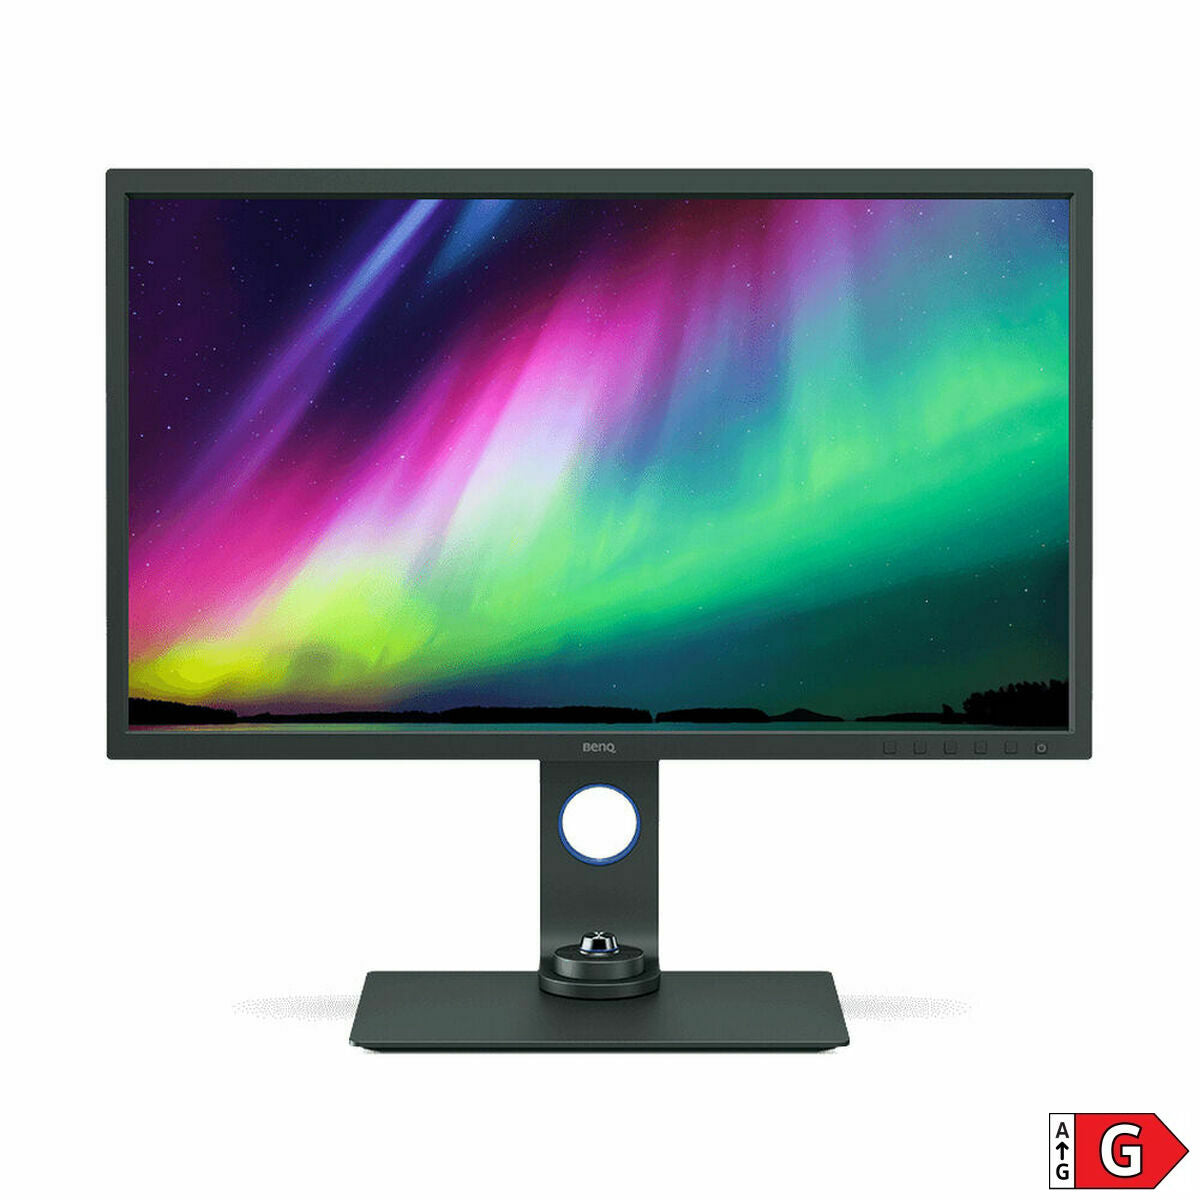 Monitor BenQ SW321C 32" LED IPS 60 Hz 50-60  Hz, BenQ, Computing, monitor-benq-sw321c-32-led-ips-60-hz-50-60-hz, :AMD, :AMD Freesync, :Ultra HD, Brand_BenQ, category-reference-2609, category-reference-2642, category-reference-2644, category-reference-t-19685, computers / peripherals, Condition_NEW, office, Price_+ 1000, Teleworking, RiotNook